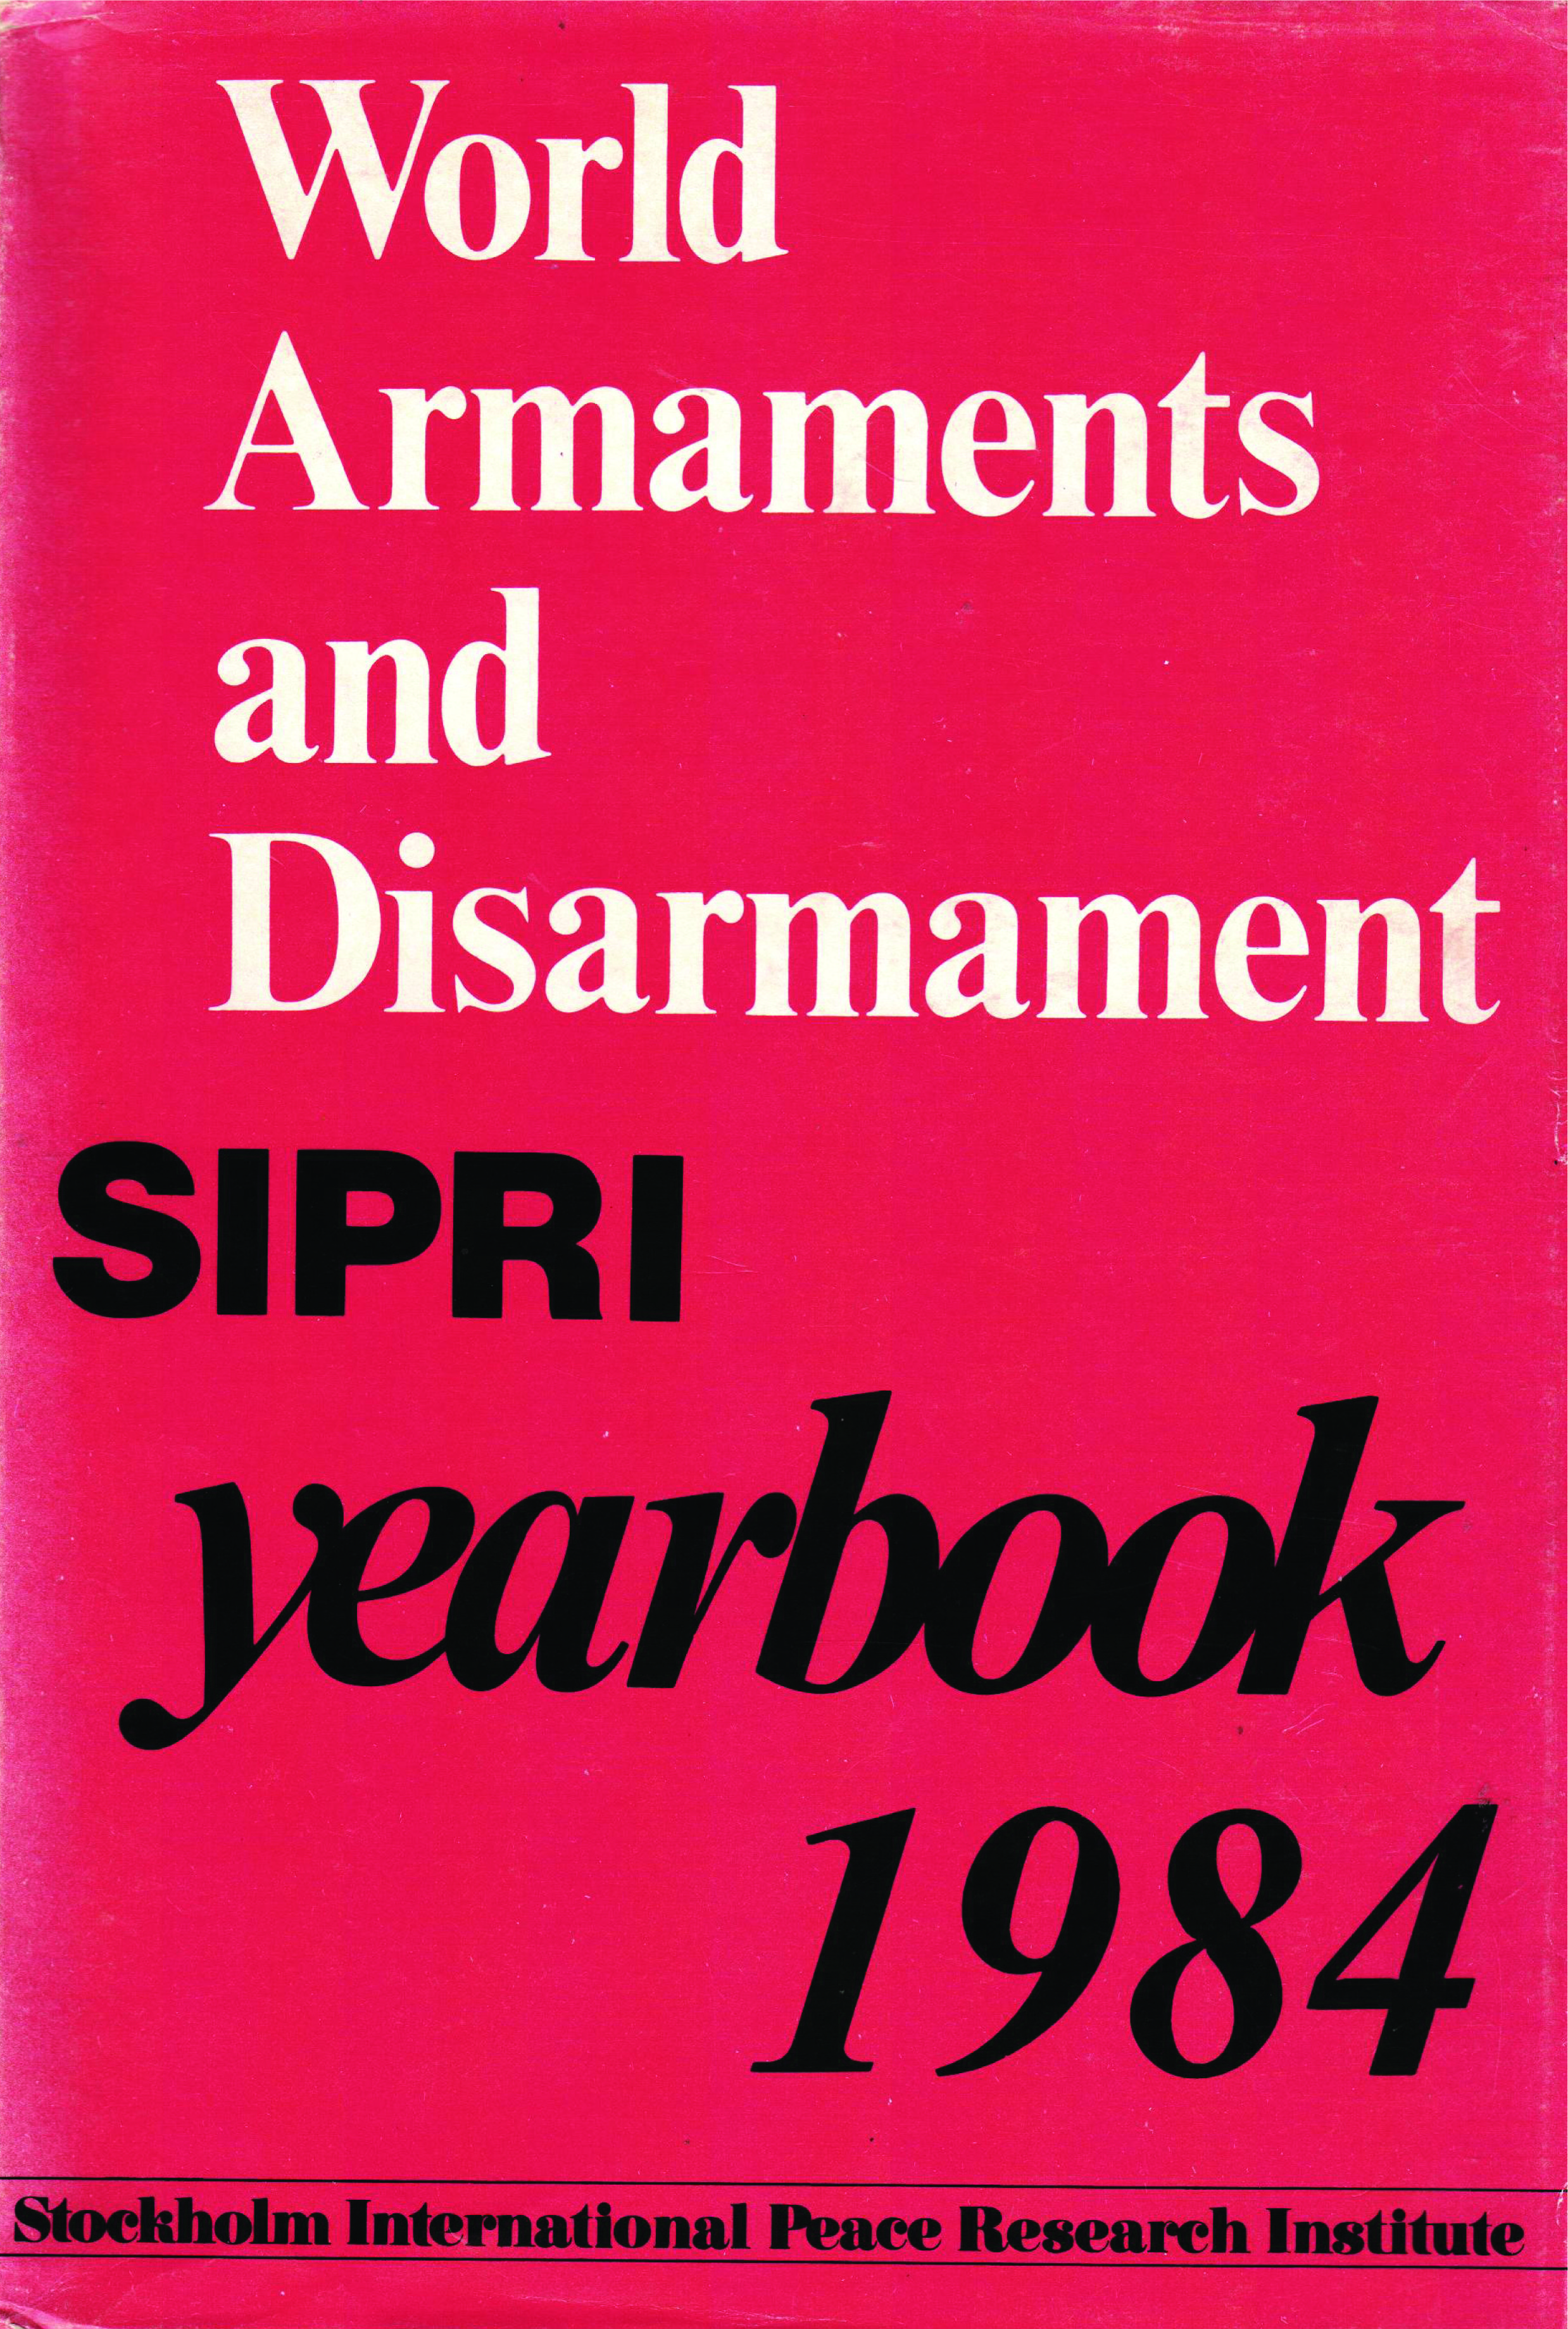 SIPRI yearbook 1984 cover